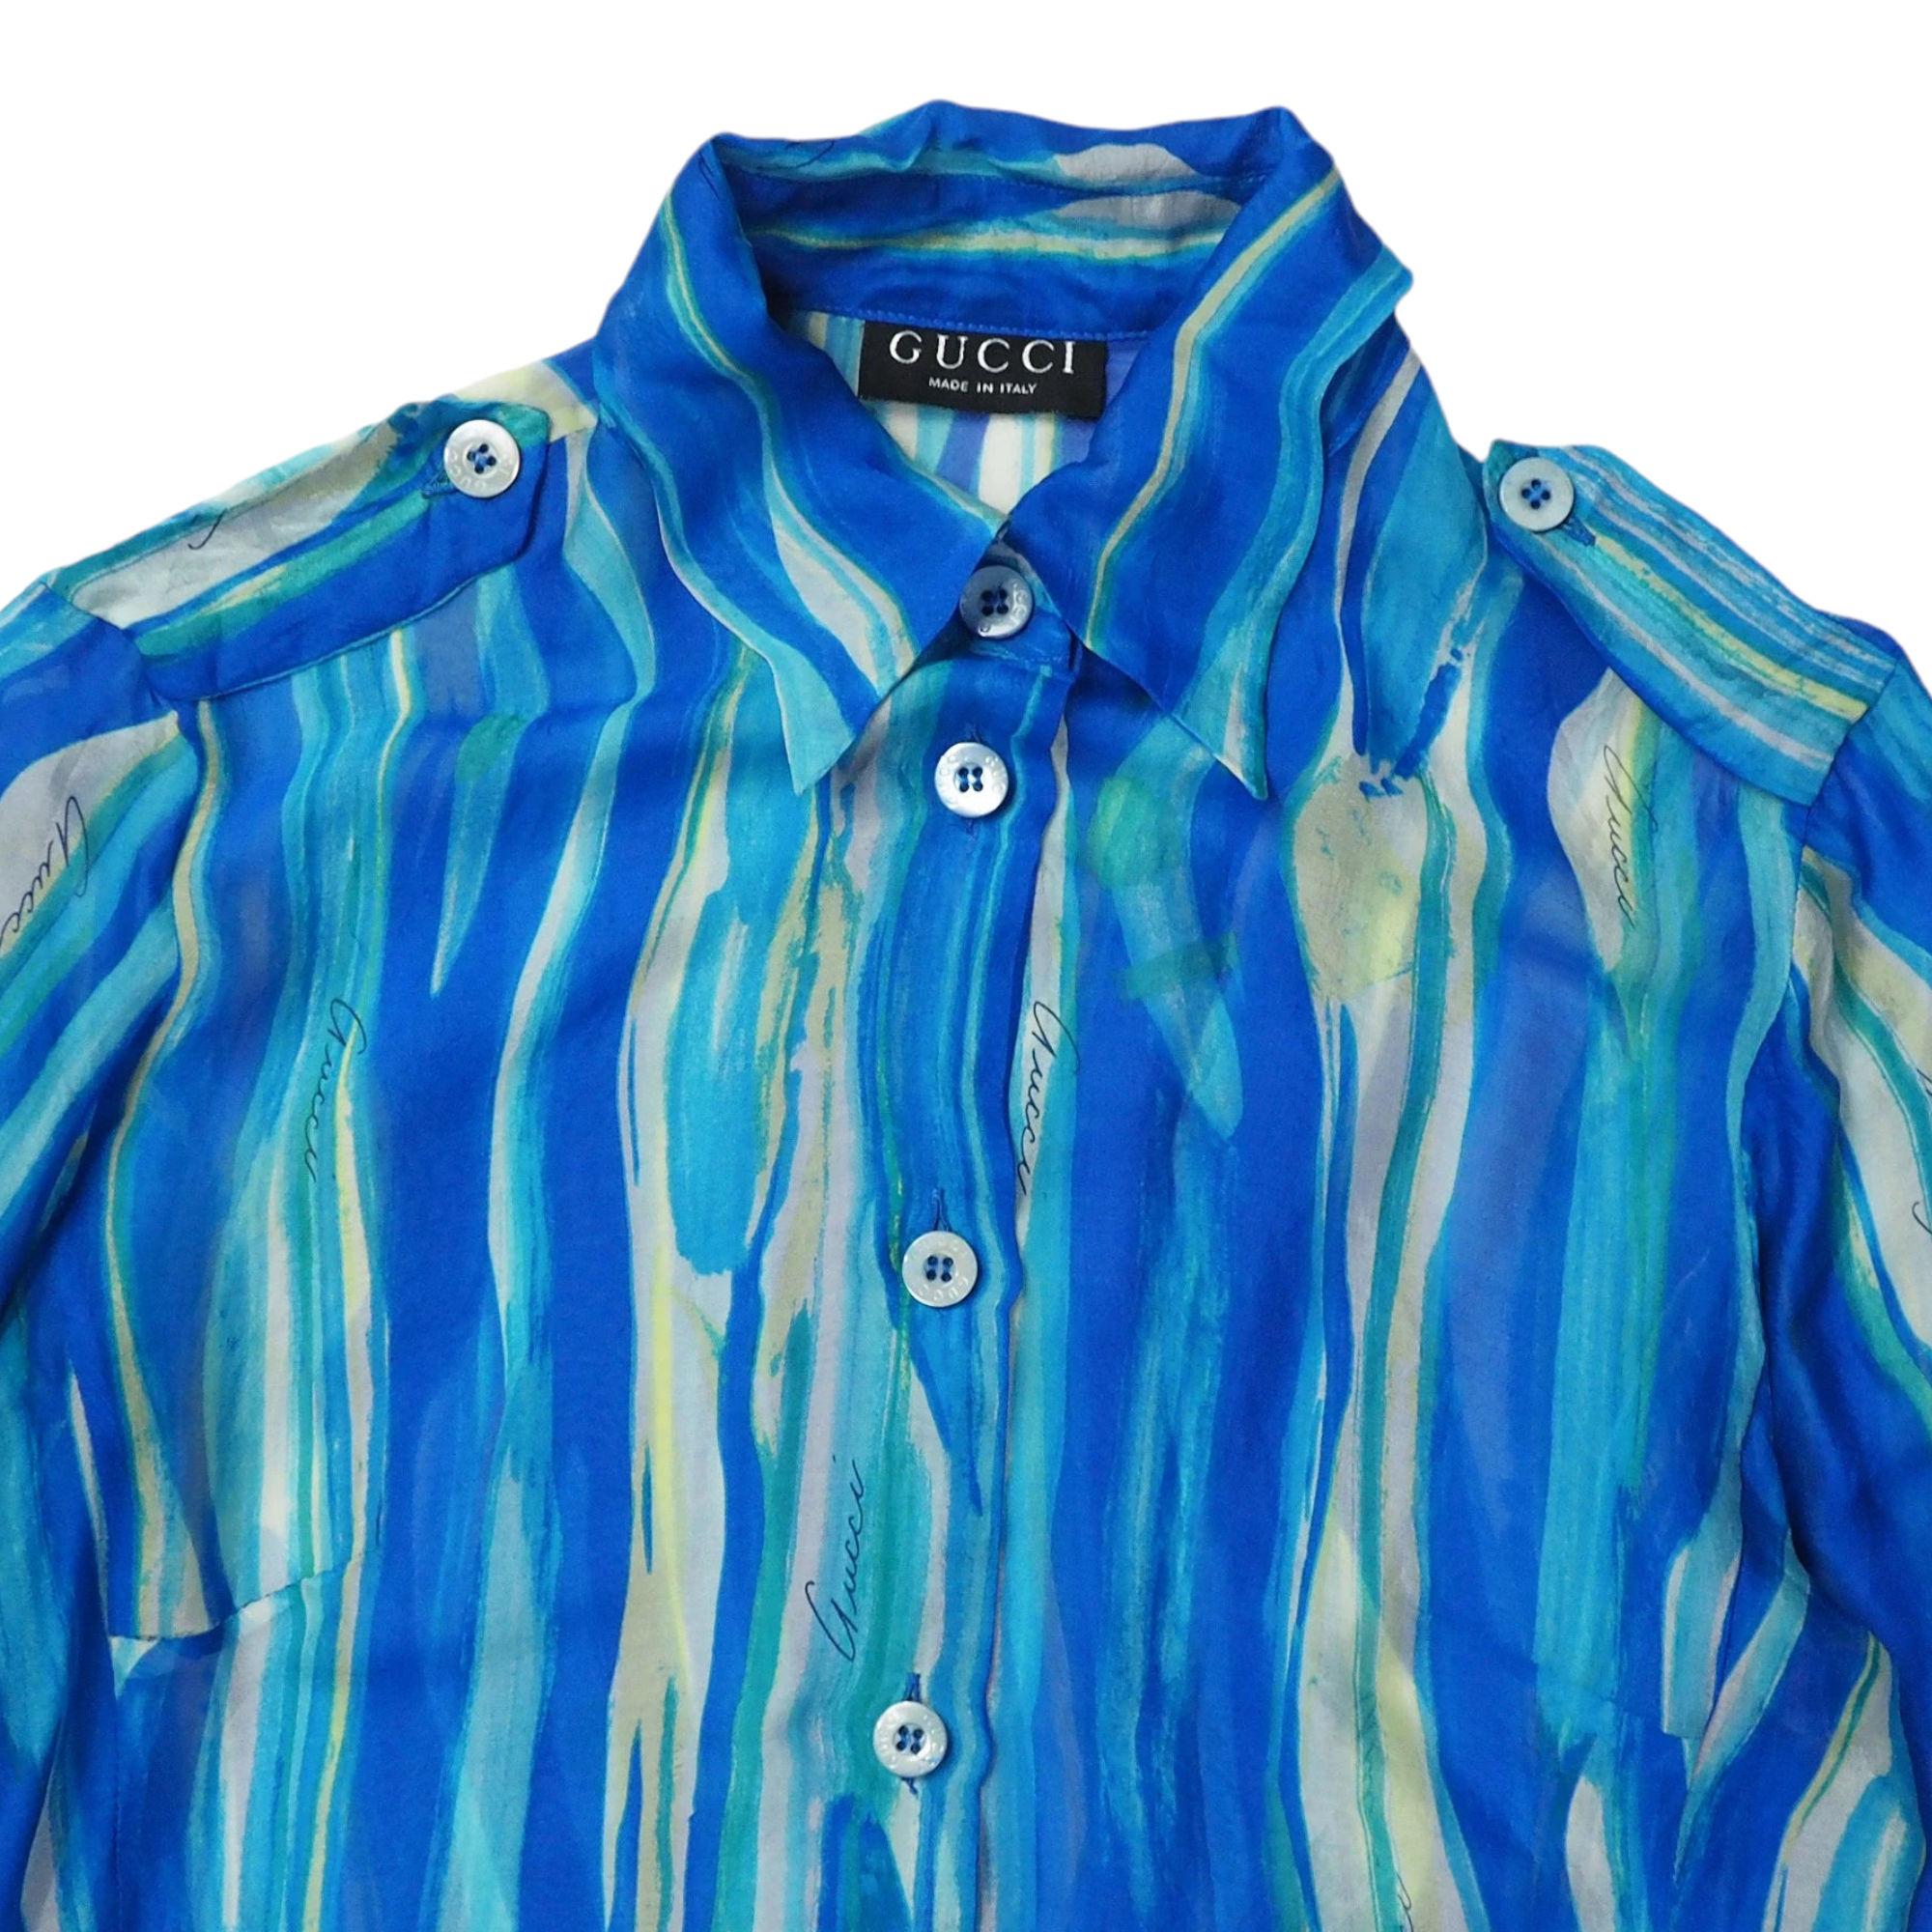 GUCCI S/S 1996 by Tom Ford Abstract Colour Printed Silk Sheer Shirt For Sale 5